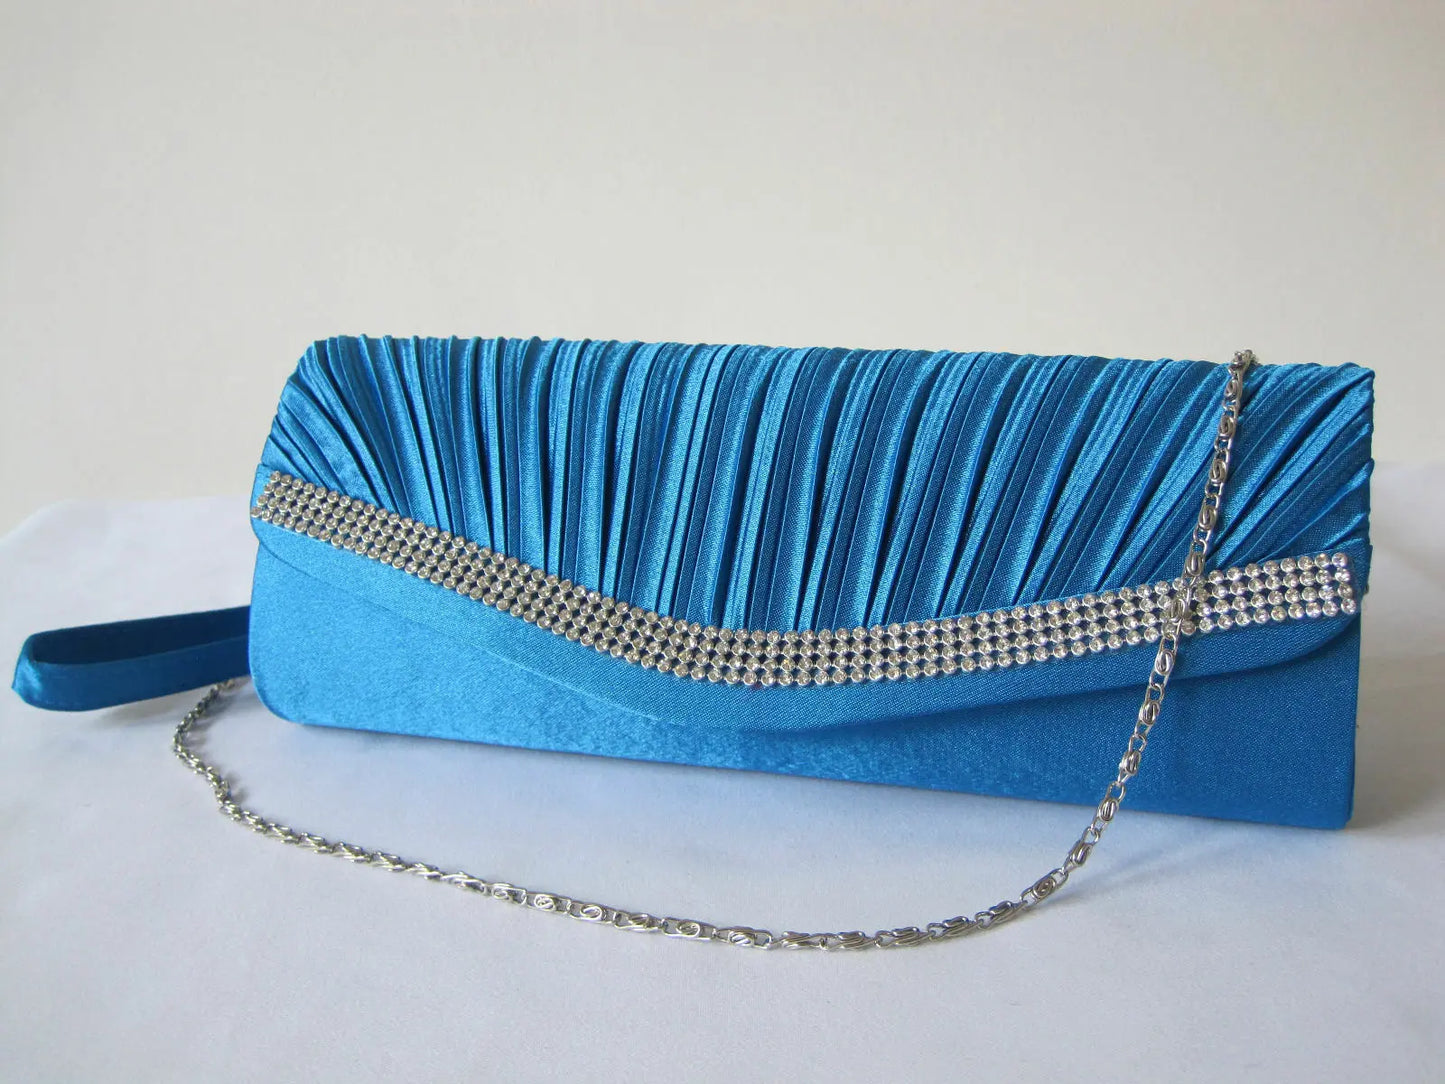 NEW turquoise  SATIN RUFFLE diamante  DETAIl EVE BAG/Clutch/Purse/Party Bridal Unbranded